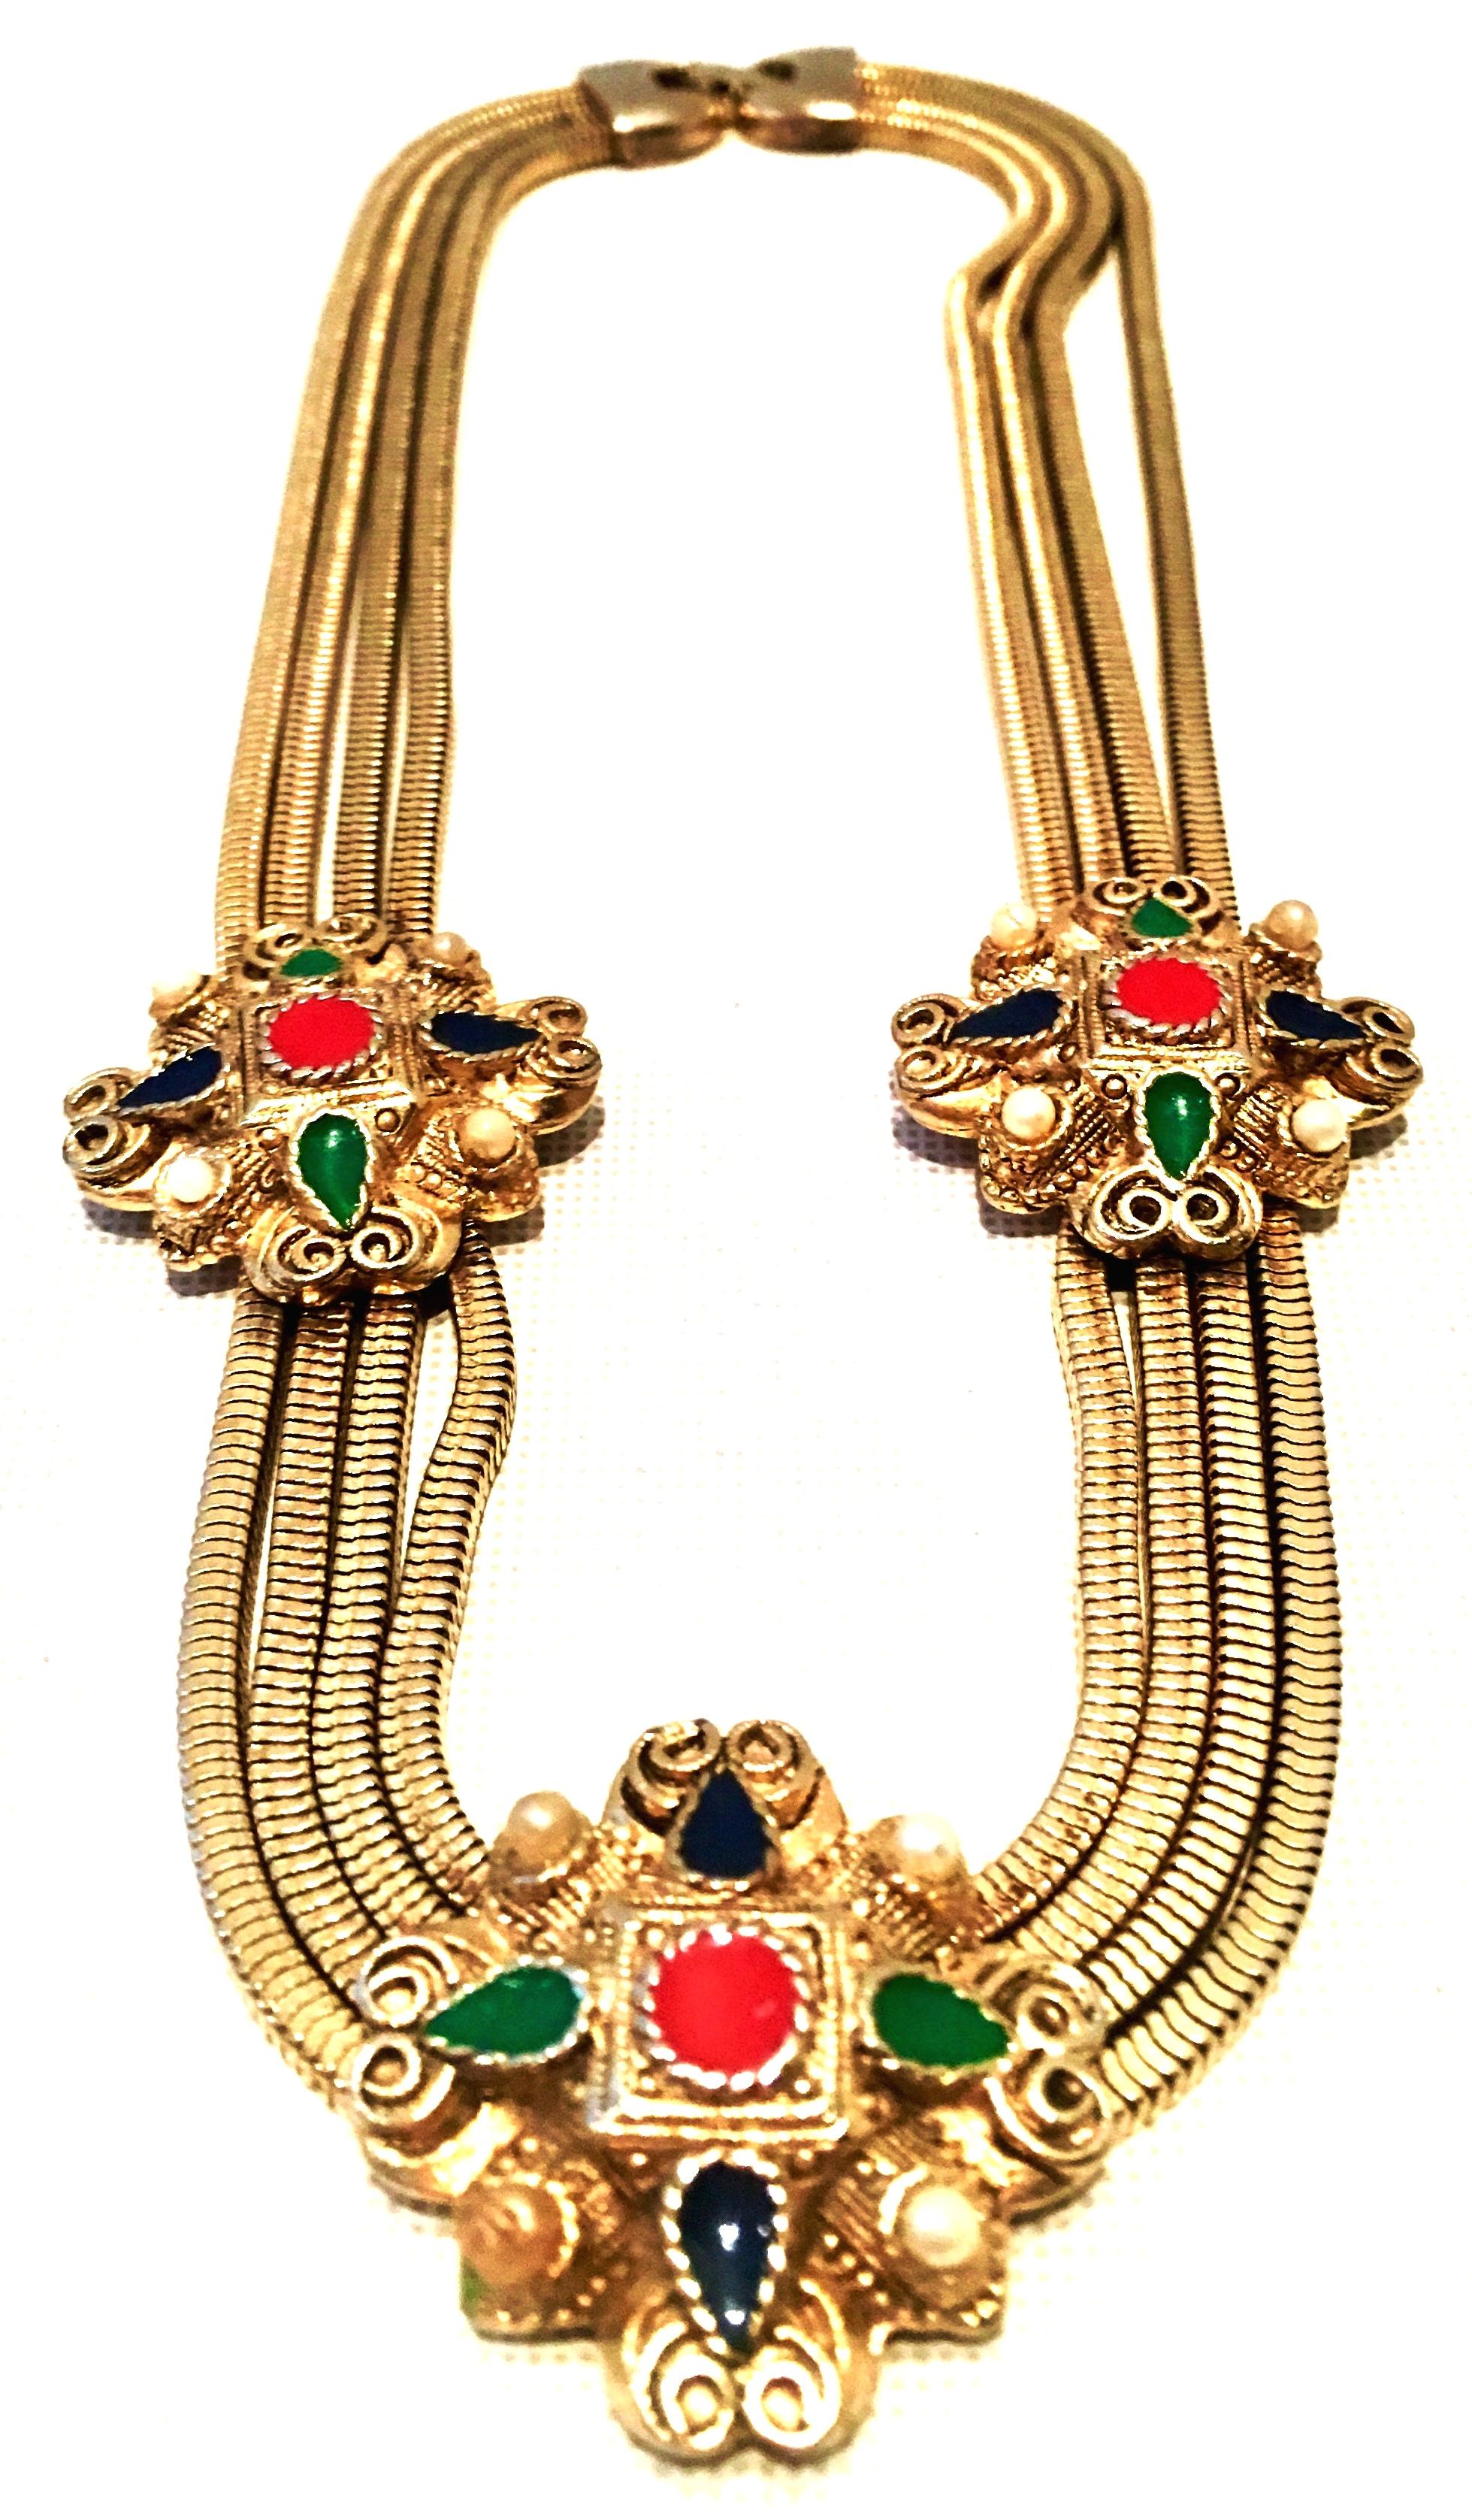 20th Century Etruscan Style Gold Plate Four Strand Snake Chain & Ornamental Choker Style Necklace.
This unique piece features four strands of gold plate snake style chain with three applied 1.25